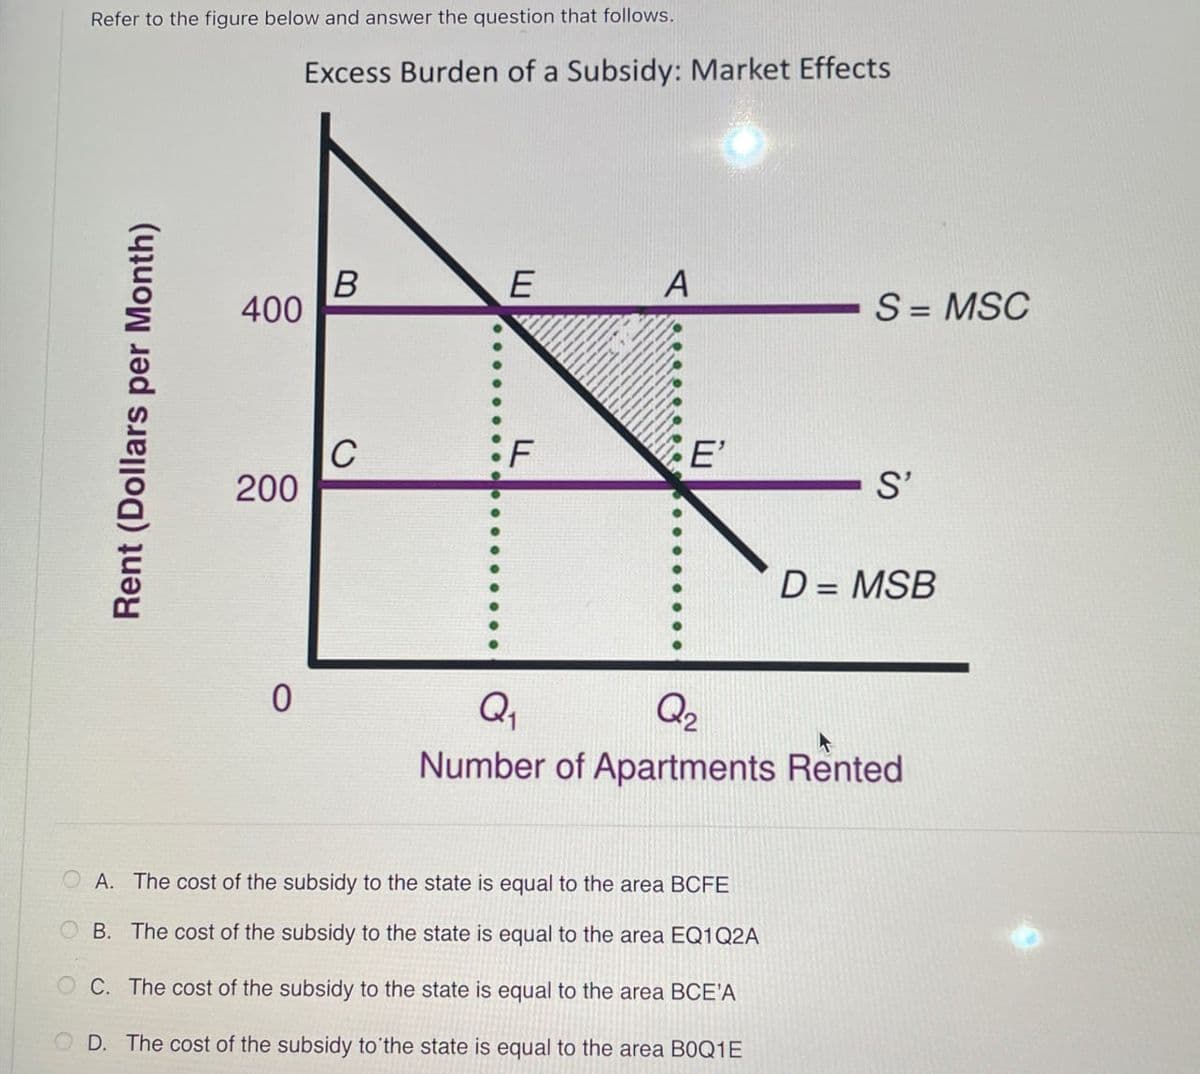 Refer to the figure below and answer the question that follows.
Excess Burden of a Subsidy: Market Effects
Rent (Dollars per Month)
400
B
E
A
S = MSC
C
F
E'
S'
200
D = MSB
0
Q₁
Q2
Number of Apartments Rented
A. The cost of the subsidy to the state is equal to the area BCFE
B. The cost of the subsidy to the state is equal to the area EQ1Q2A
OC. The cost of the subsidy to the state is equal to the area BCE'A
OD. The cost of the subsidy to the state is equal to the area BOQ1E